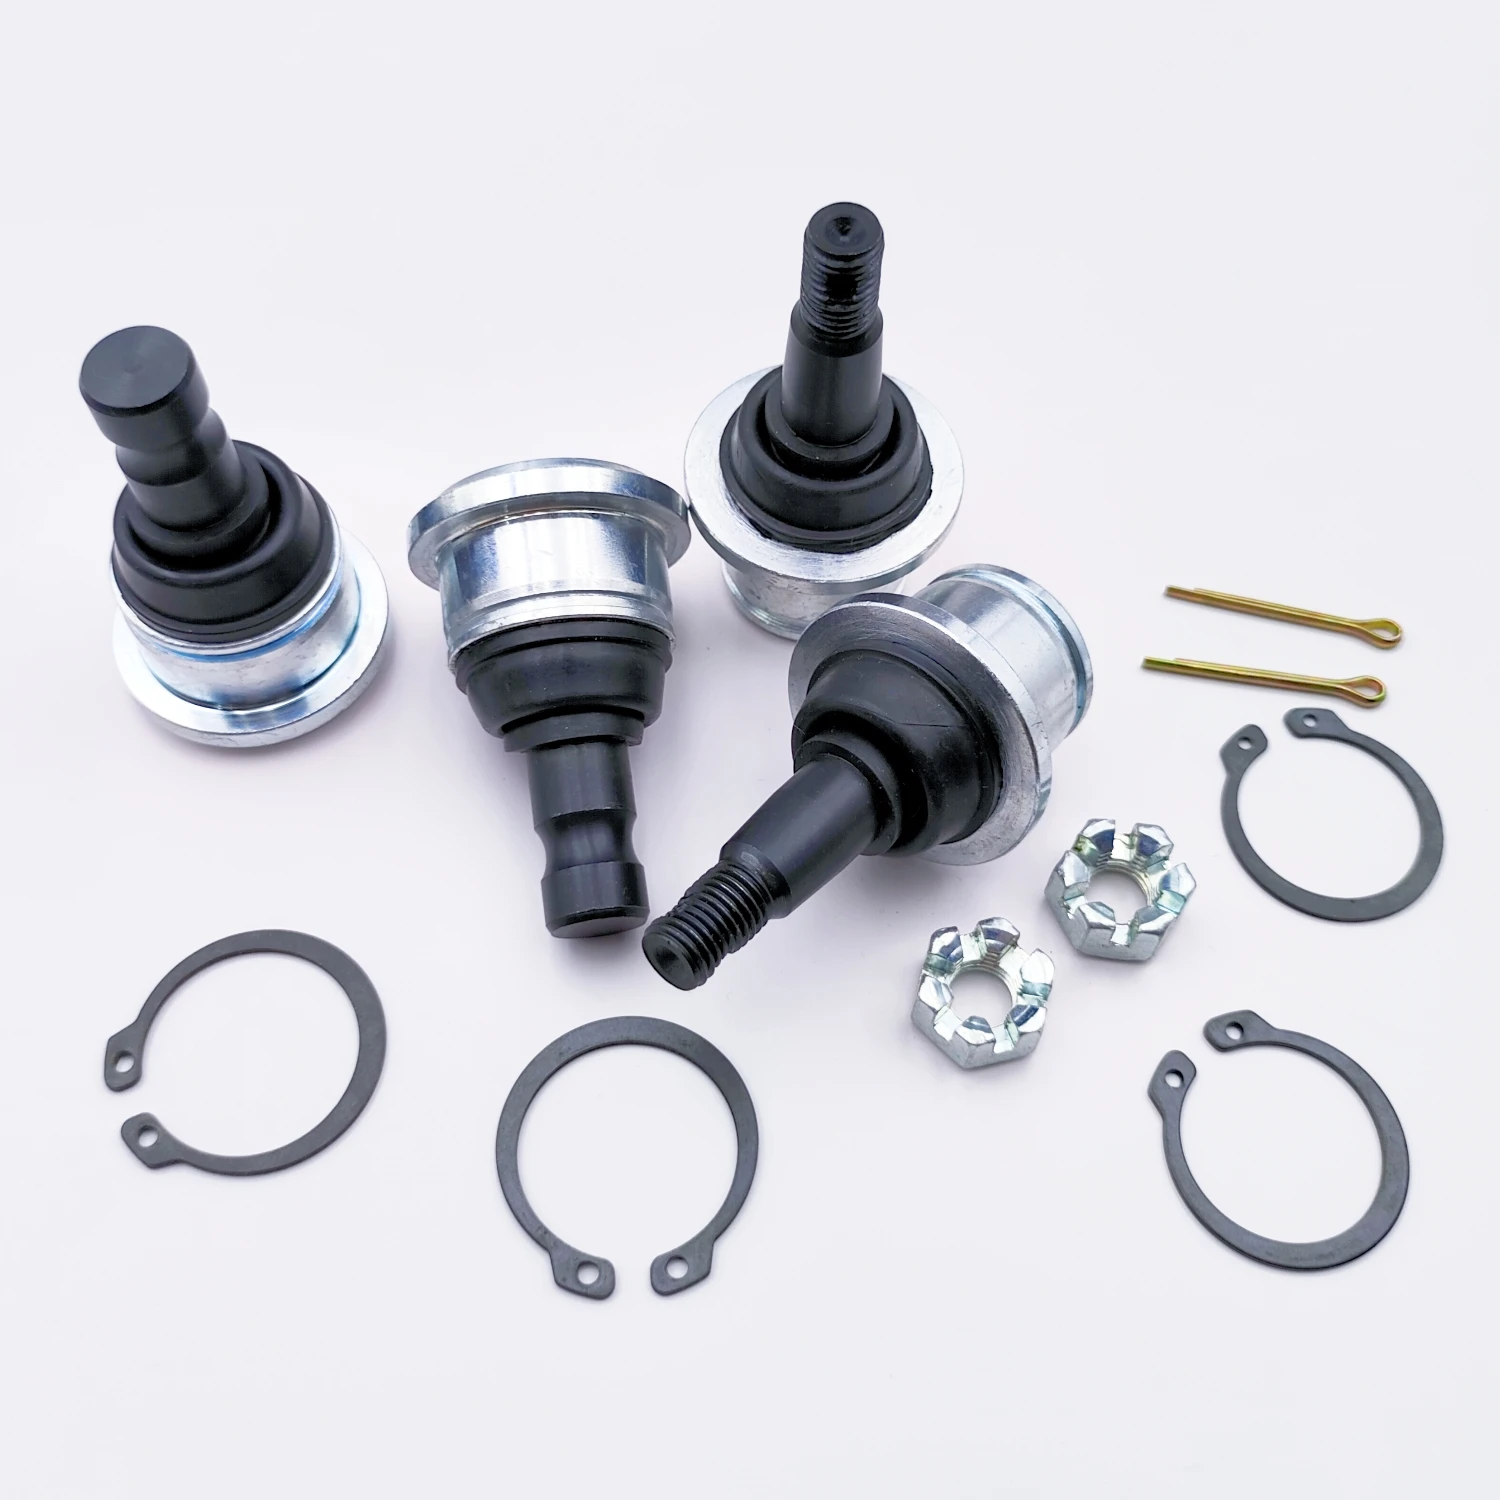 Front Suspension Lower Upper Ball Joint For Baltmotors 500 700 SMC Jumbo 700 SMC MBX 700 ATV 42155-CGV-00 for jac t6 t8 pickup suspension swing arm upper ball pin ball joint bushing automobile parts